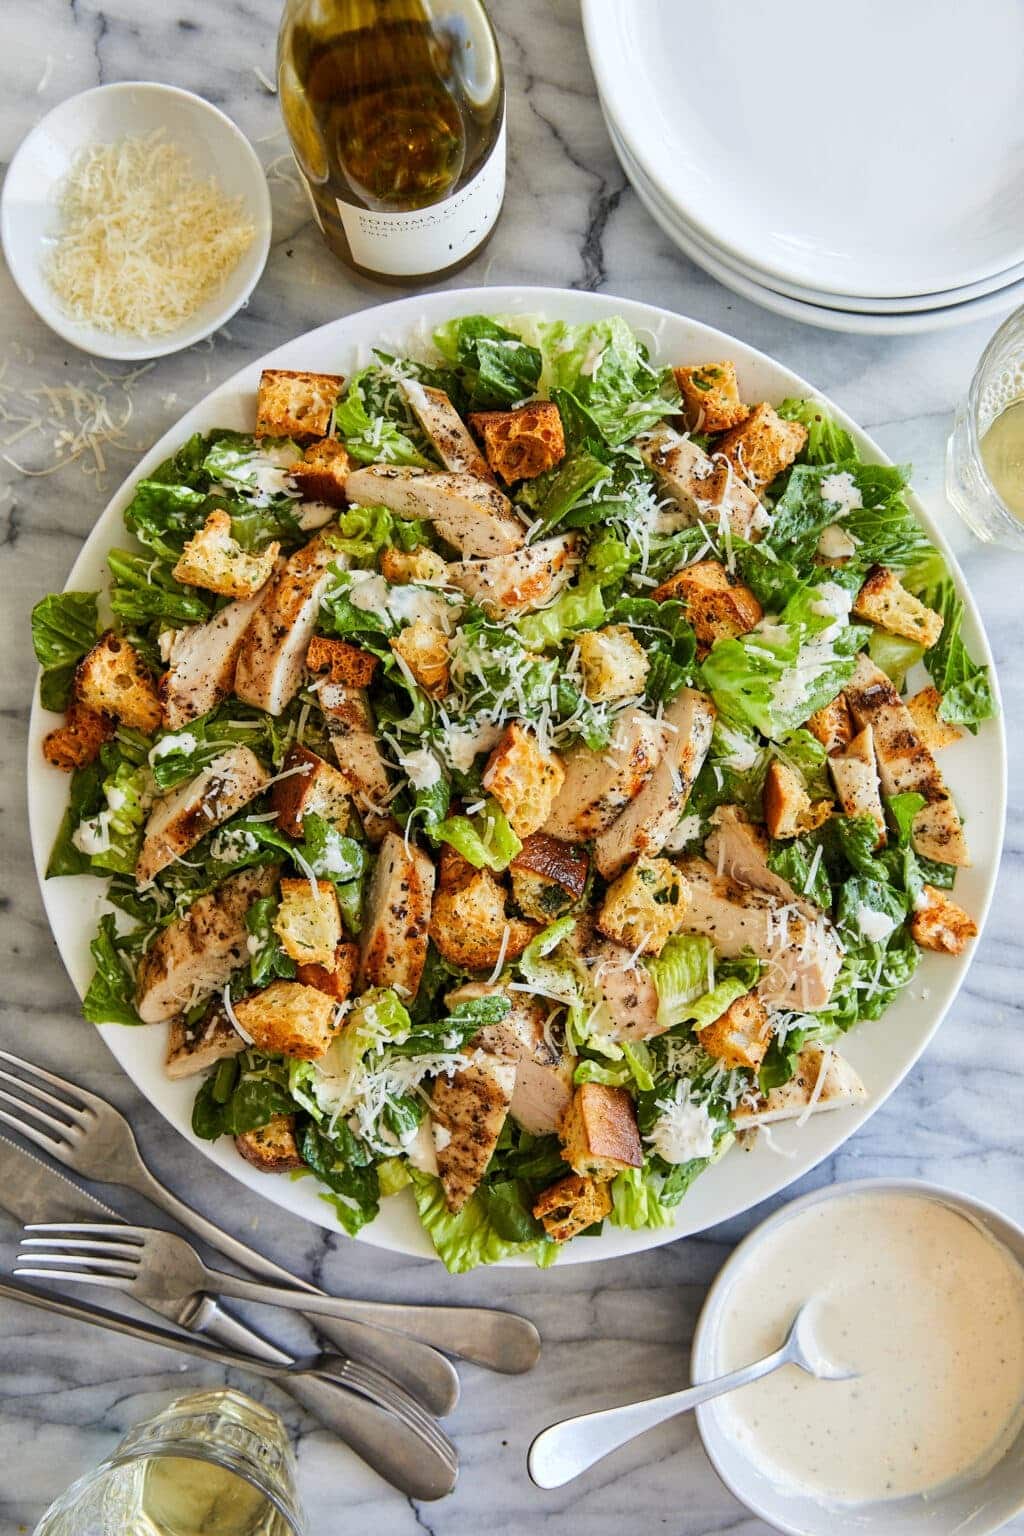 A plate of Caesar salad with romaine lettuce, Parmesan shavings, and seasoned croutons. 